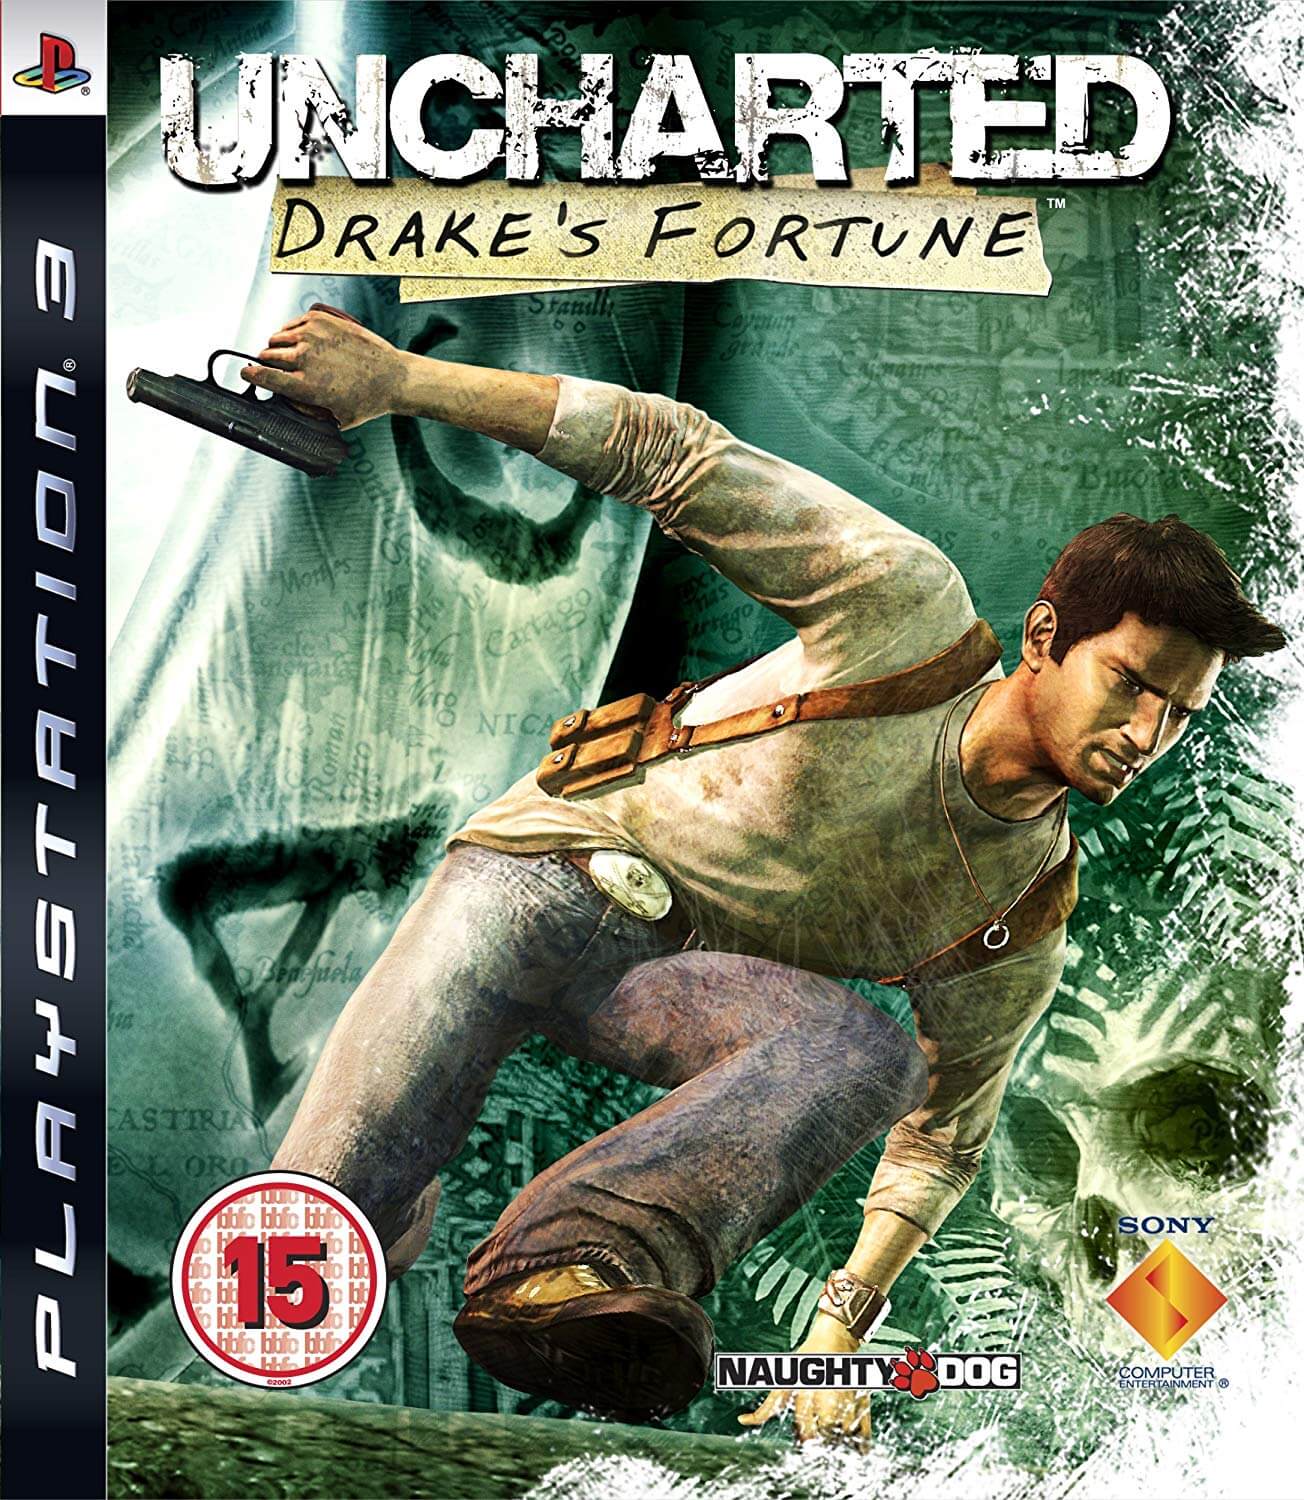 uncharted 1 pc download completo